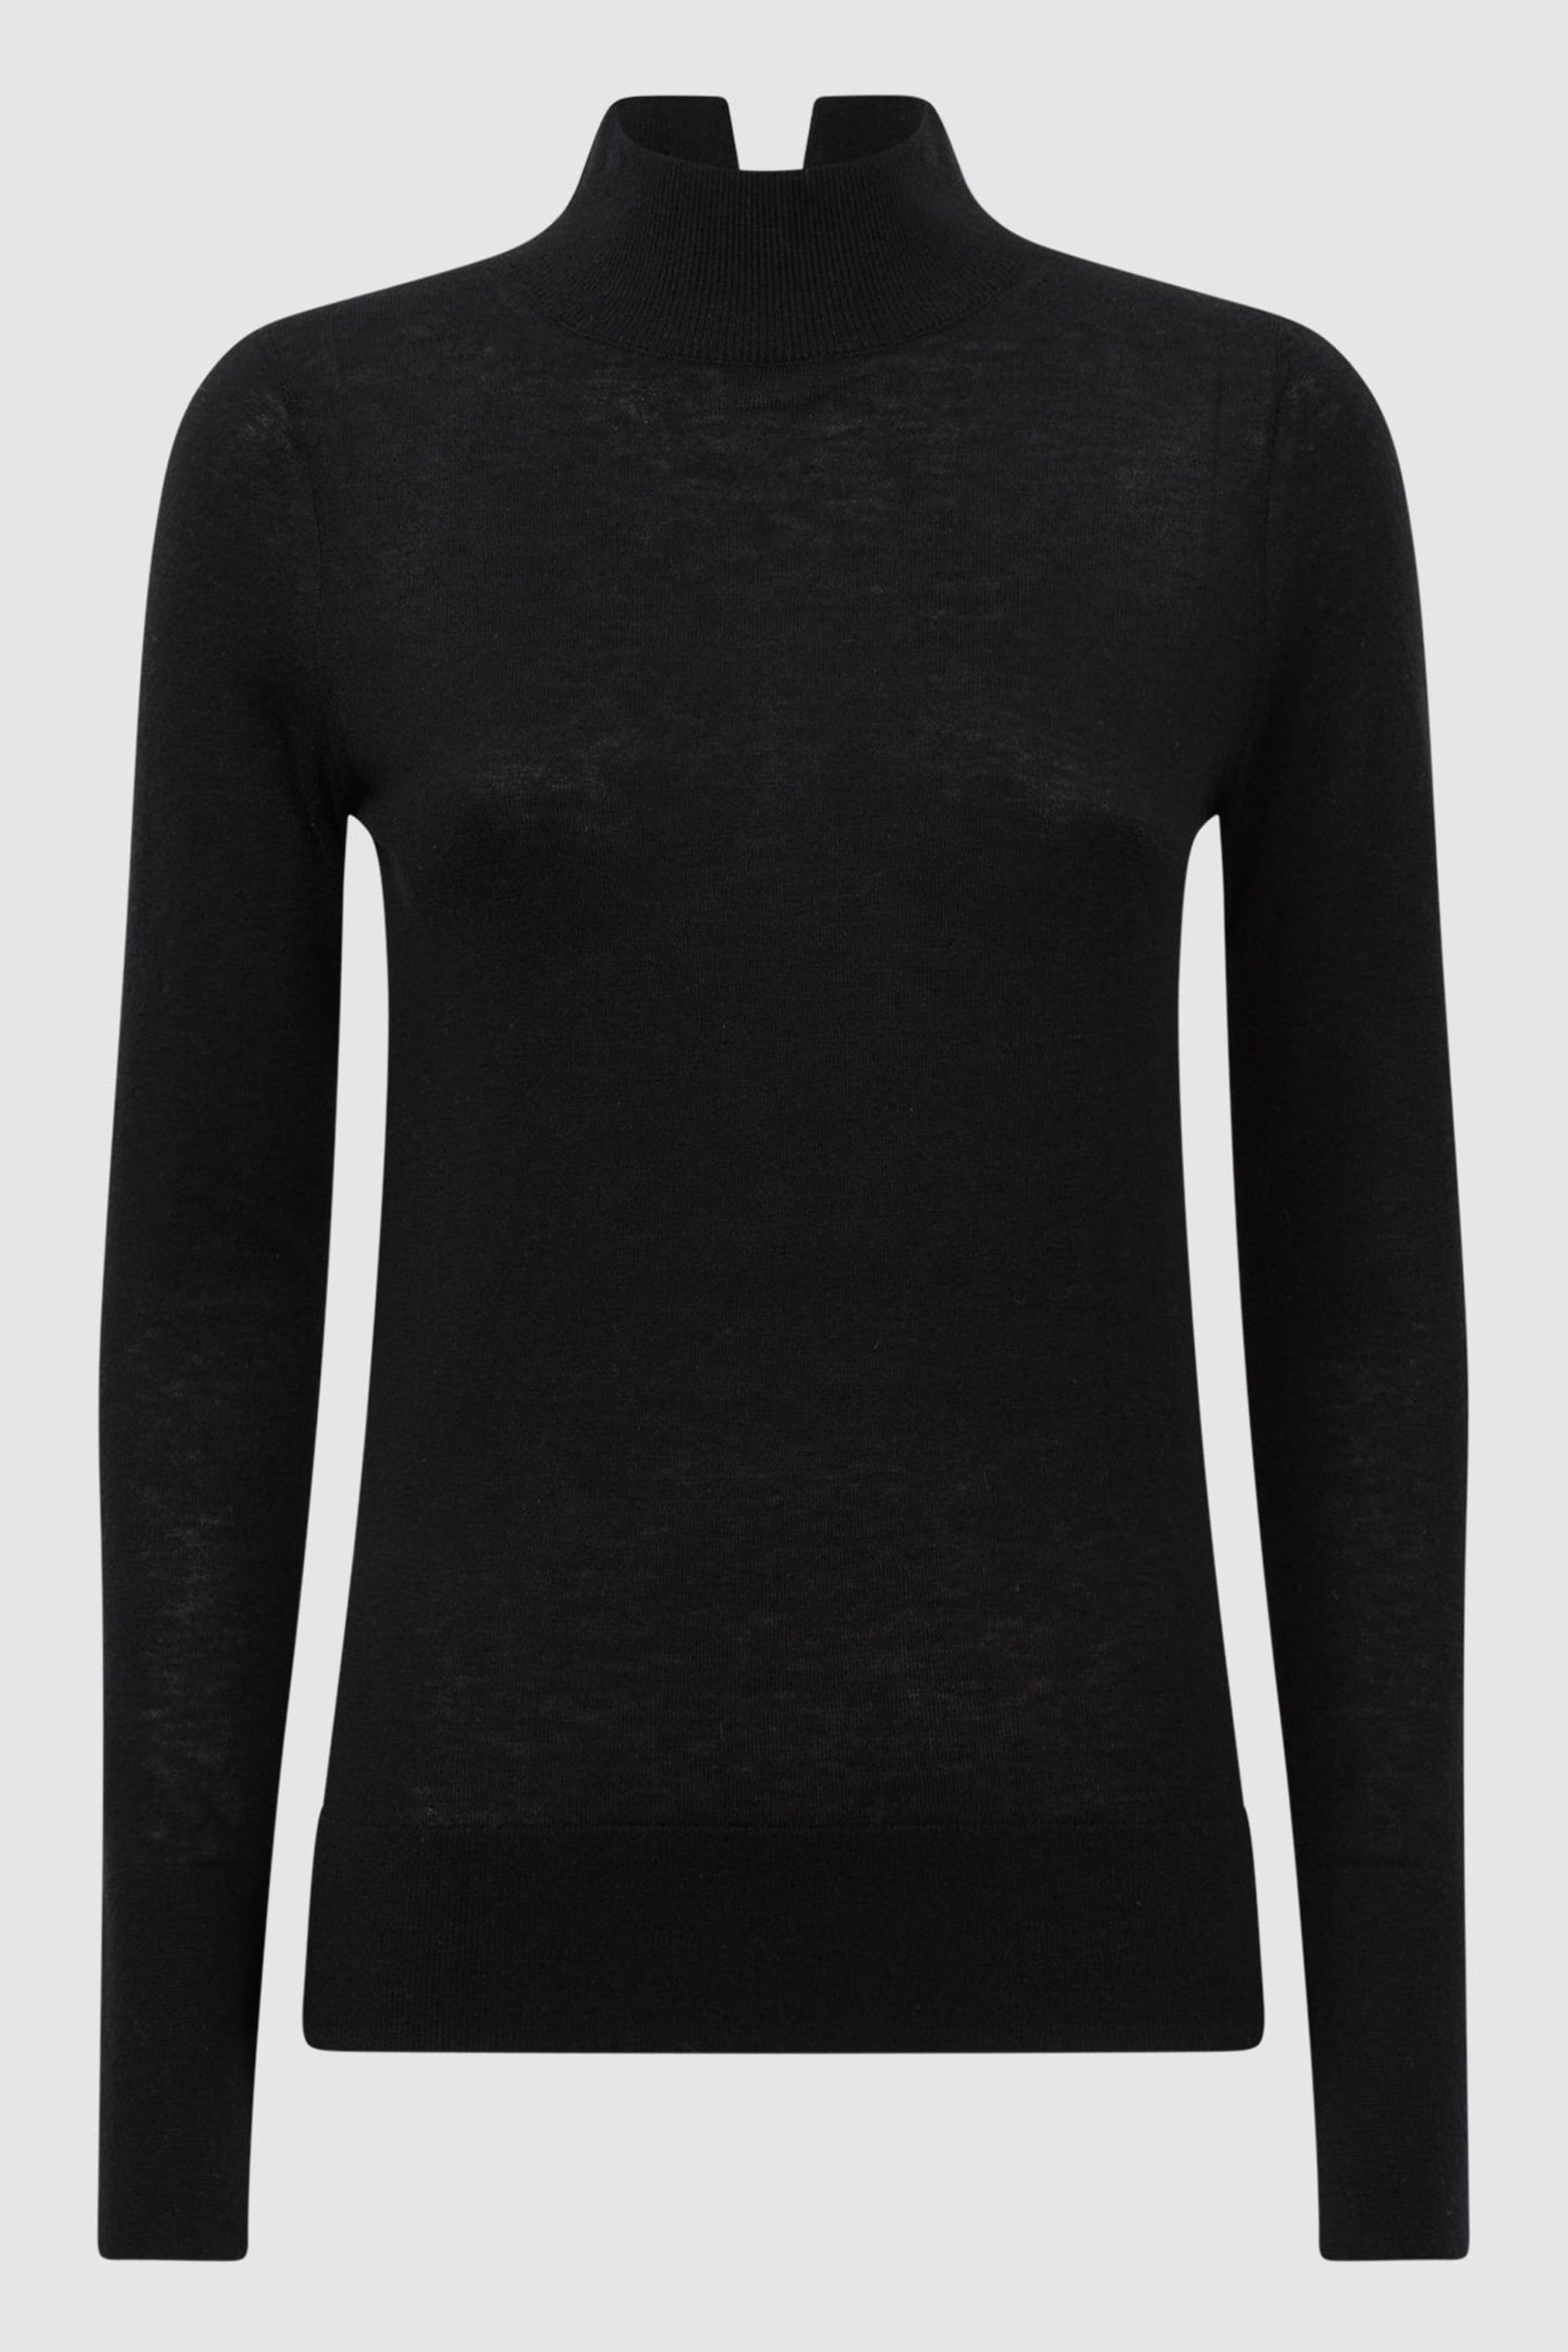 Reiss Black Kylie Merino Wool Fitted Funnel Neck Top - Image 2 of 5